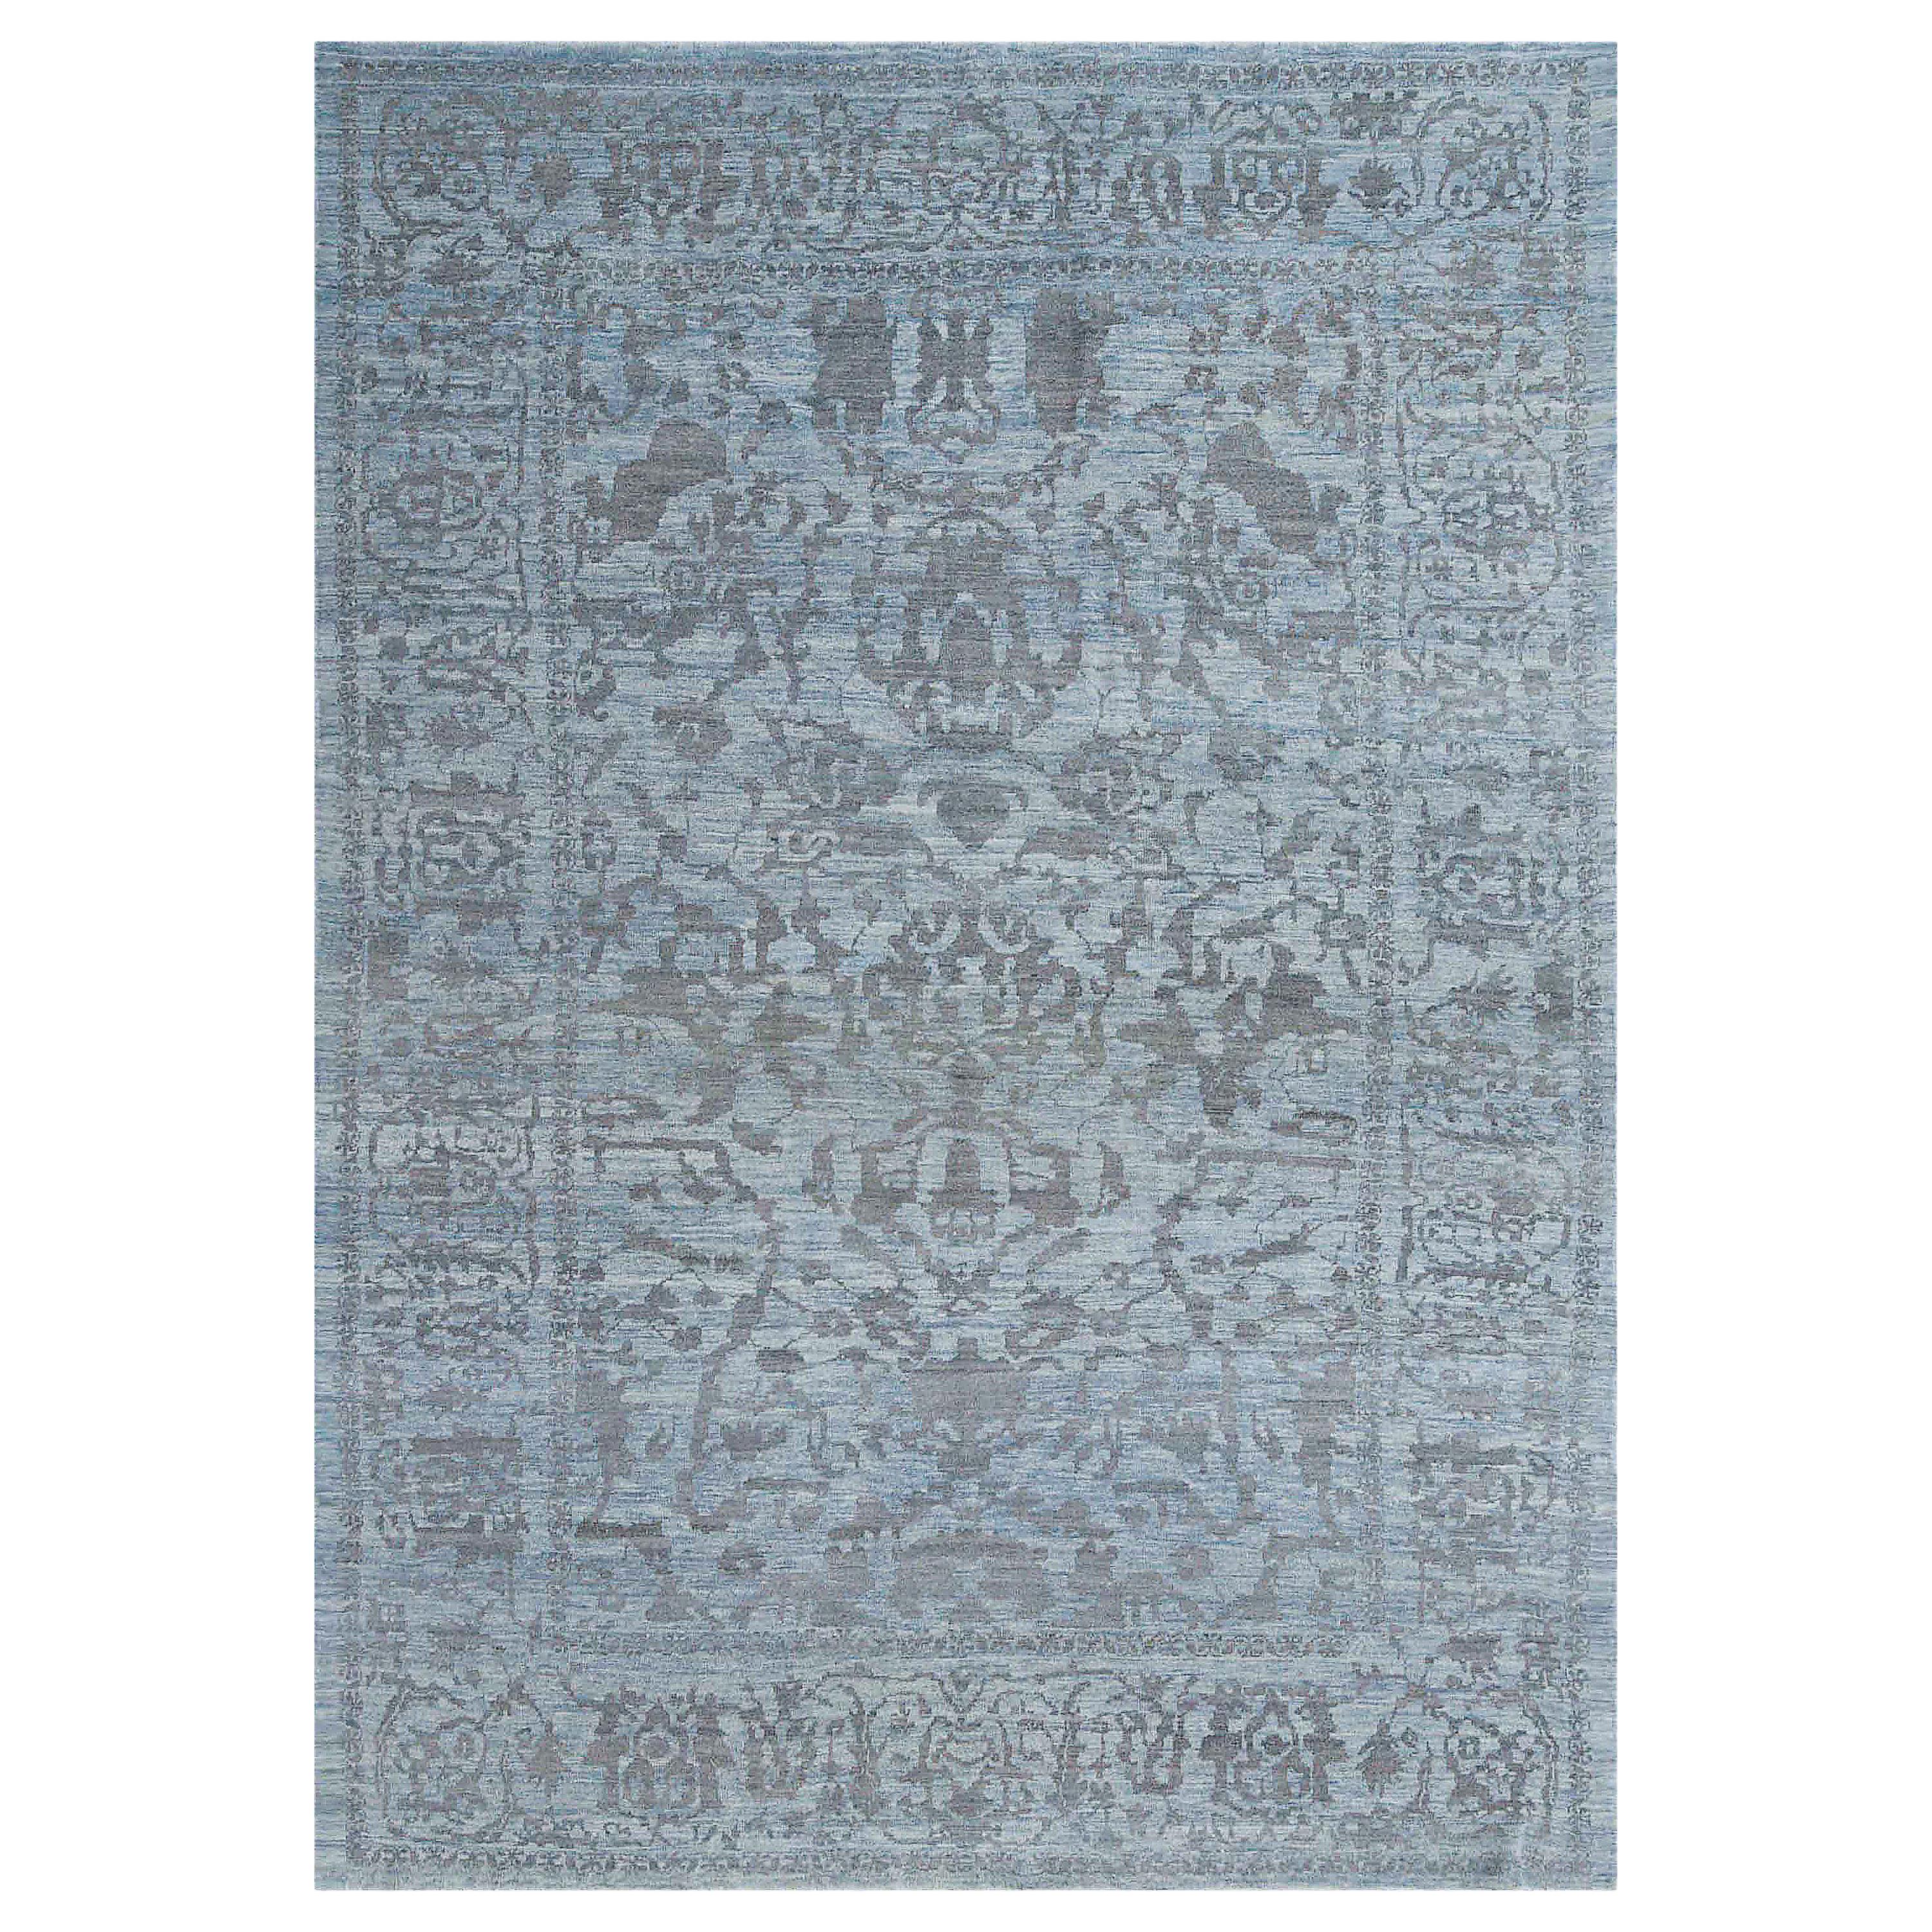 Modern Oushak Rug with Floral Designs in Gray on Blue Field For Sale